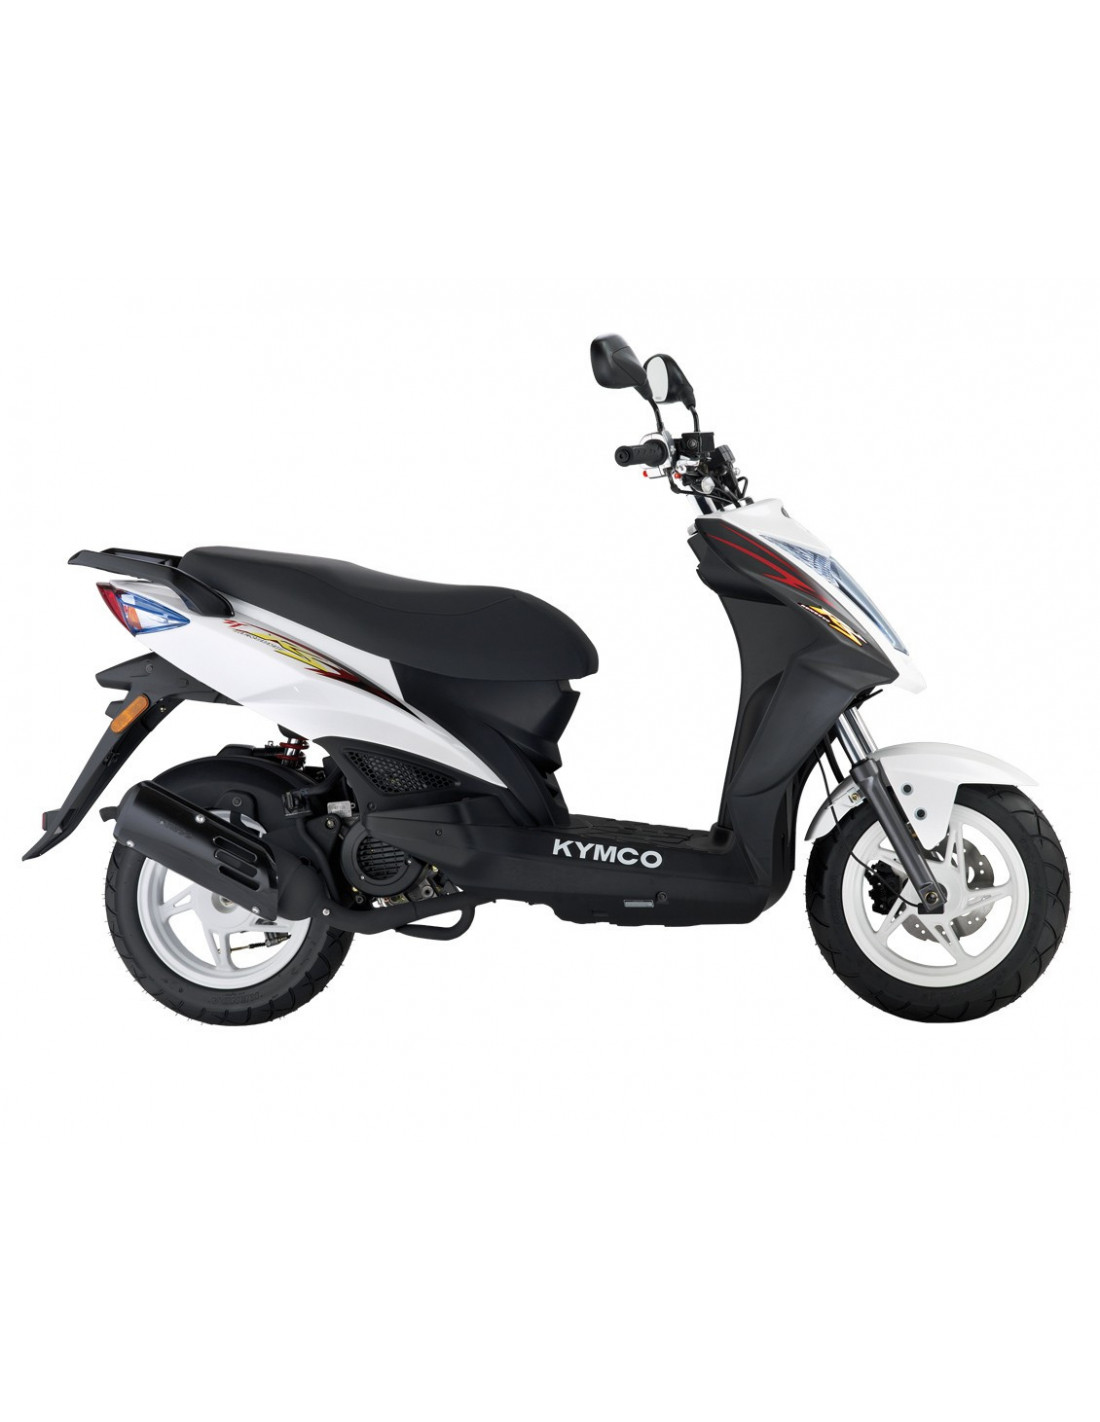 Agility 50 RS 2T NAKED Kymco